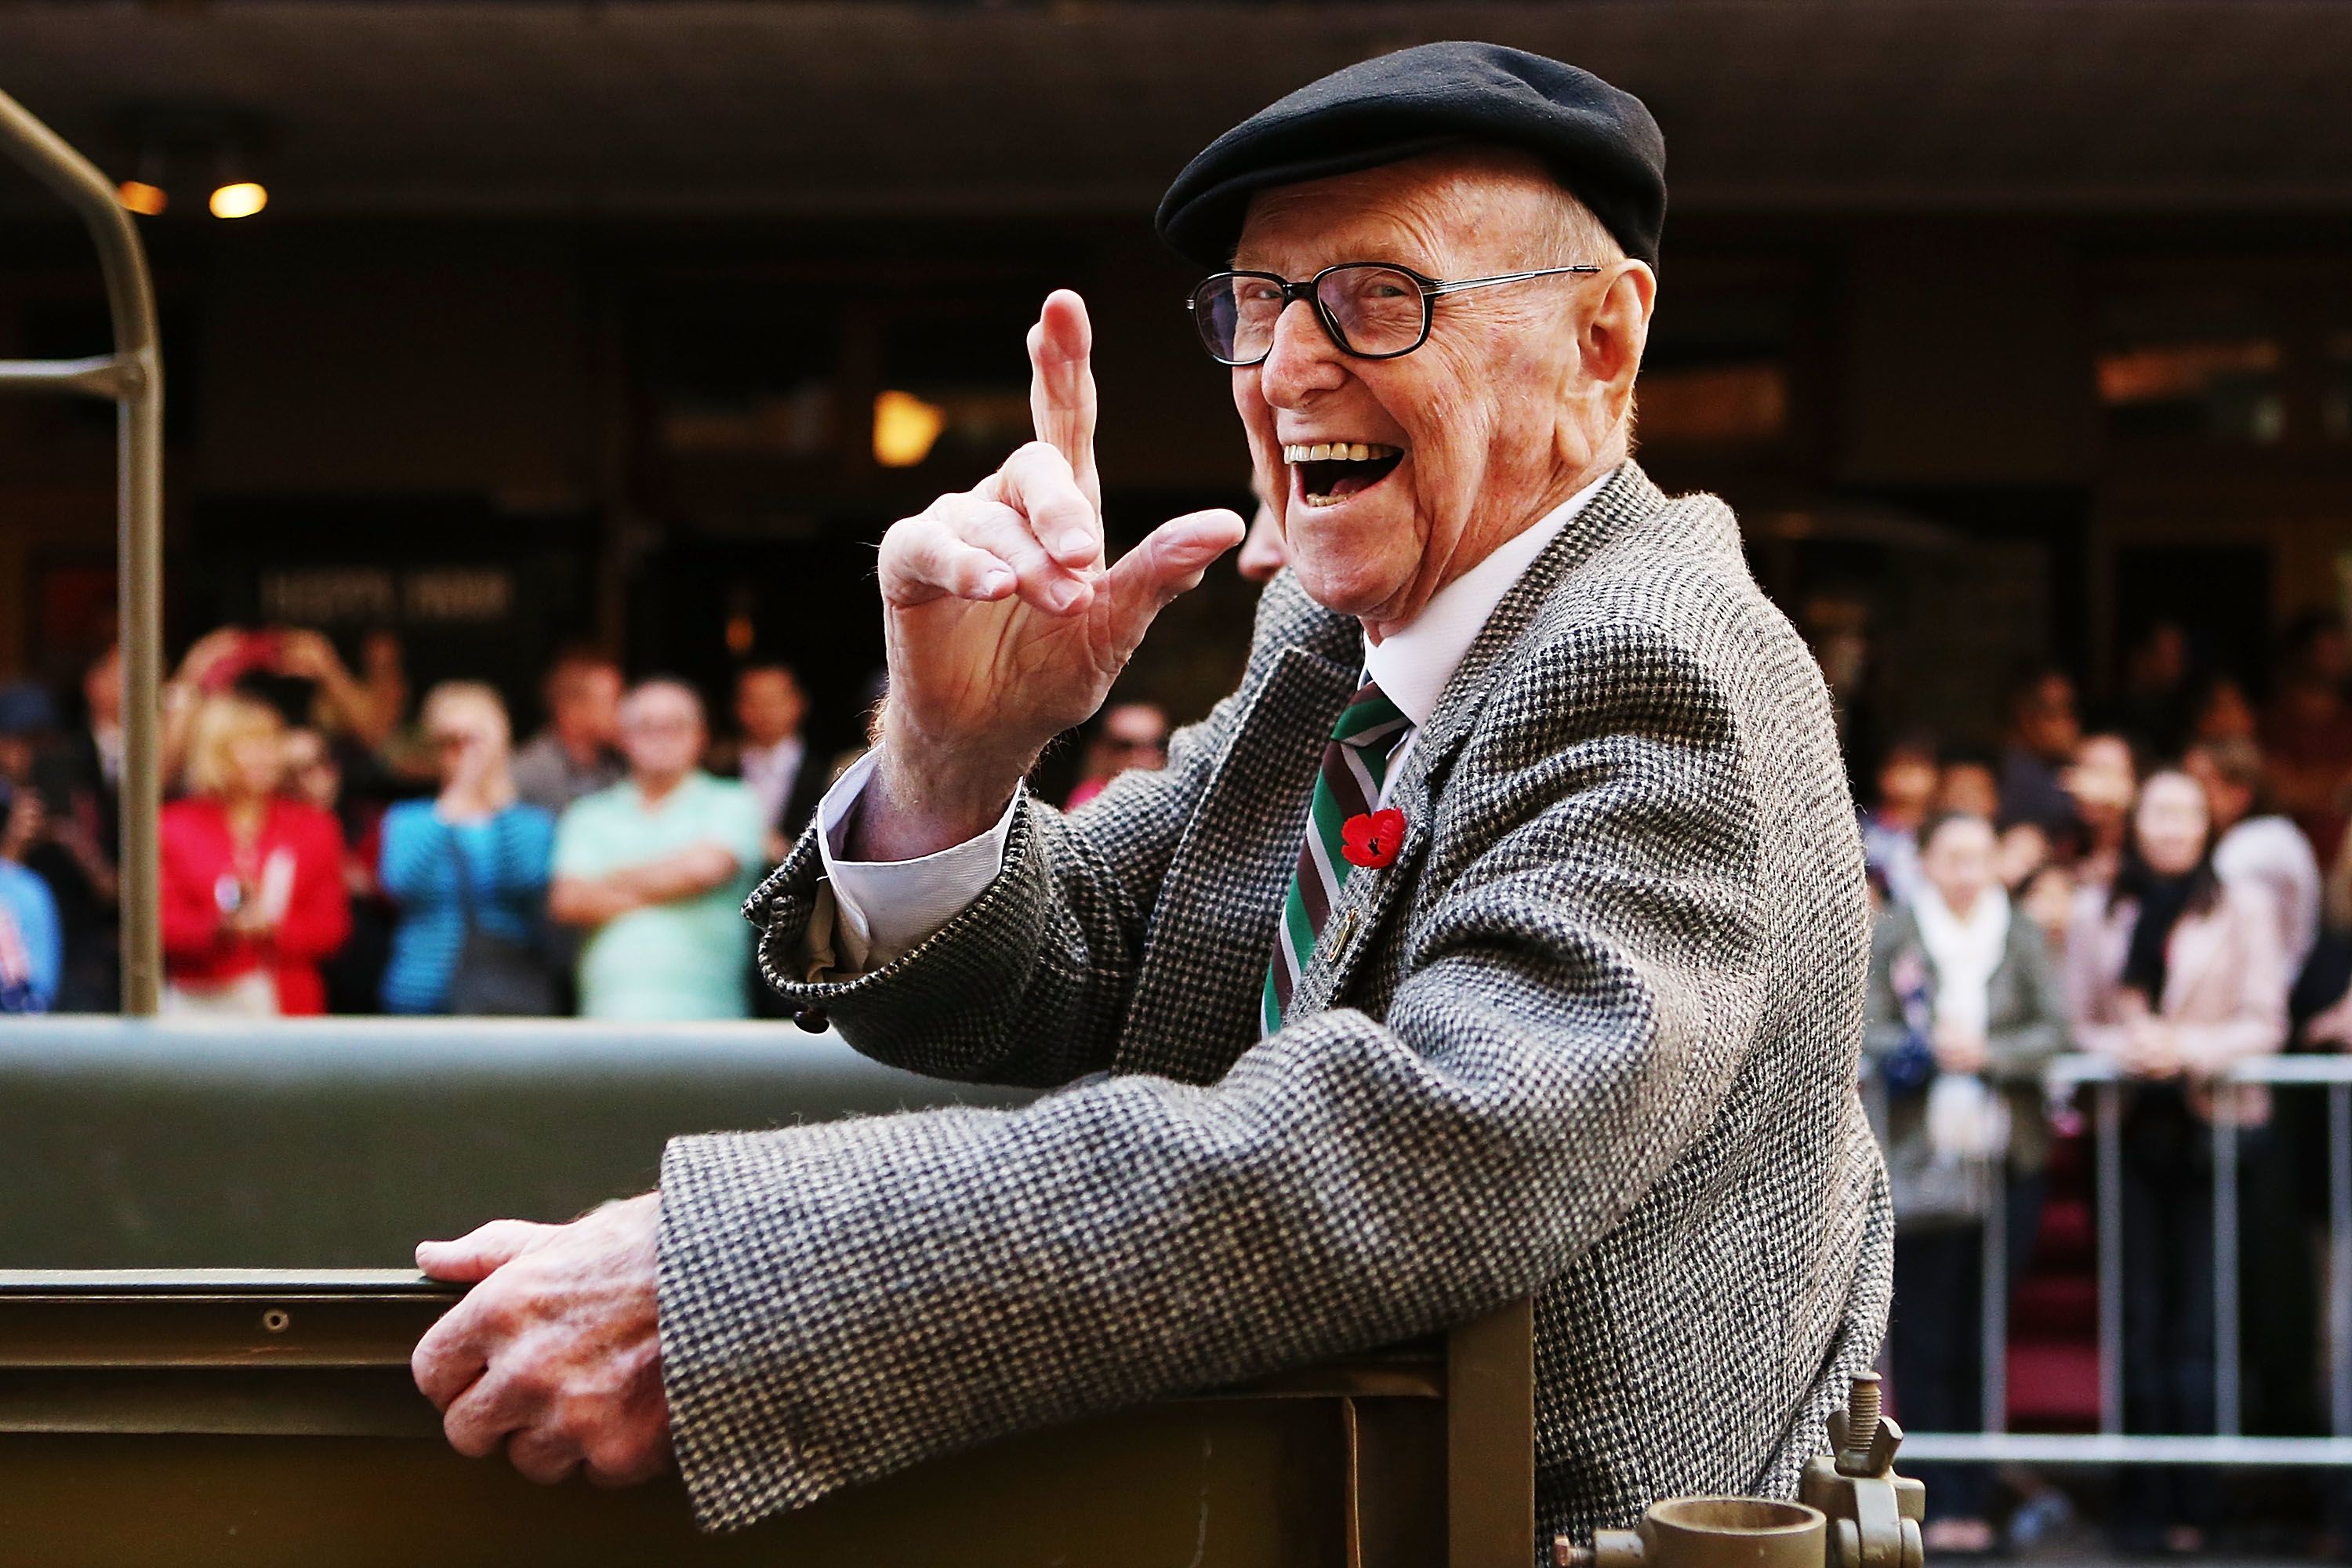 There's Finally Scientific Evidence That People Who Enjoy Life Live Longer